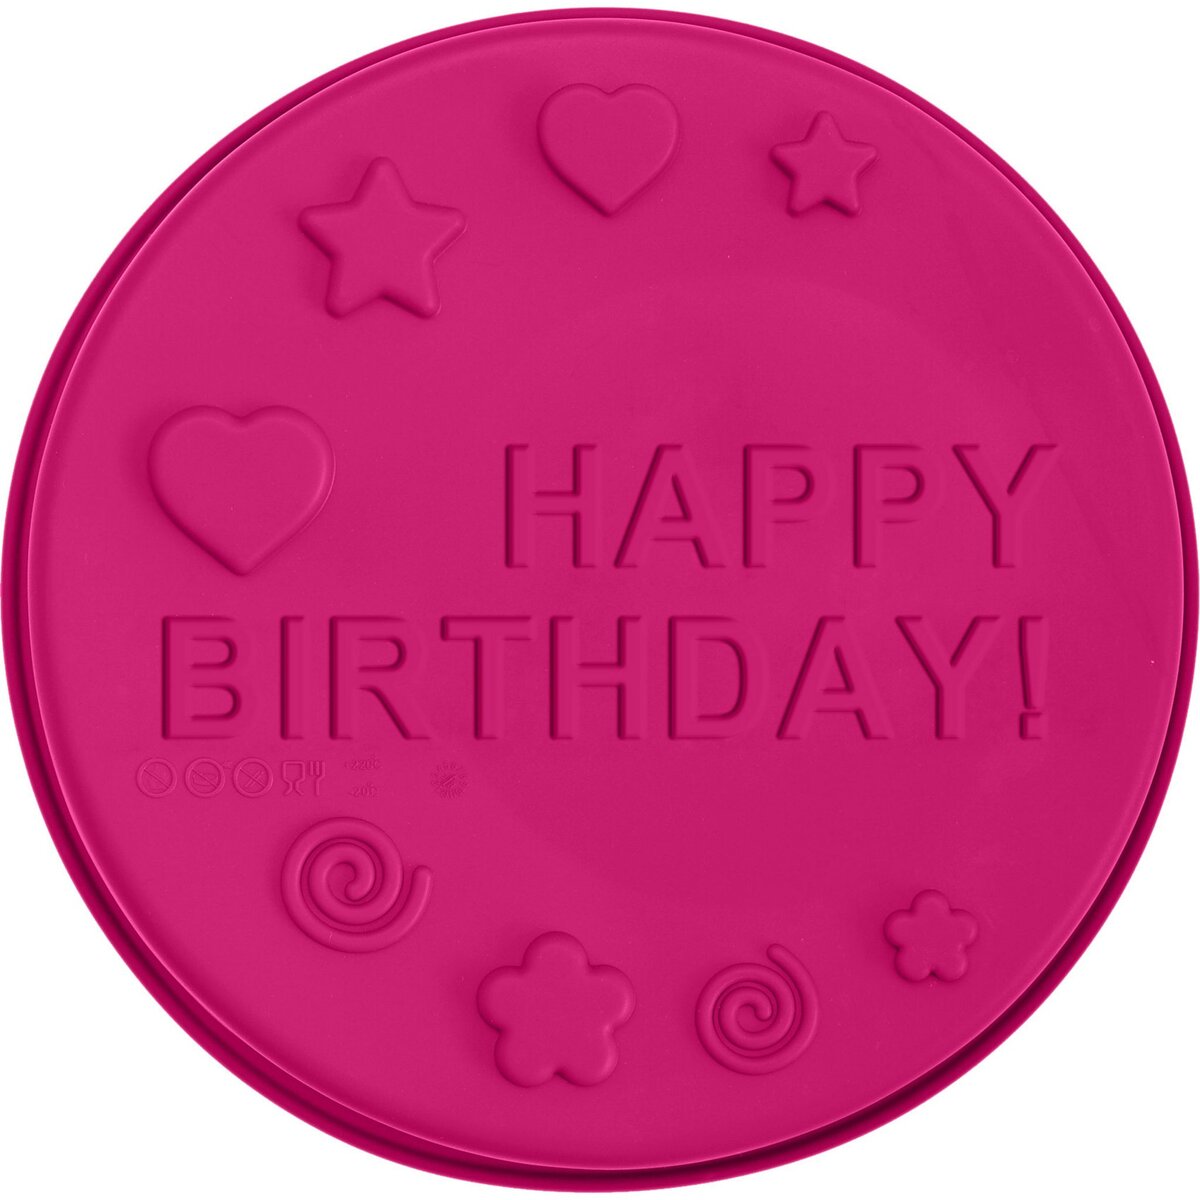 ACTUEL Moule happy birthaday silicone 